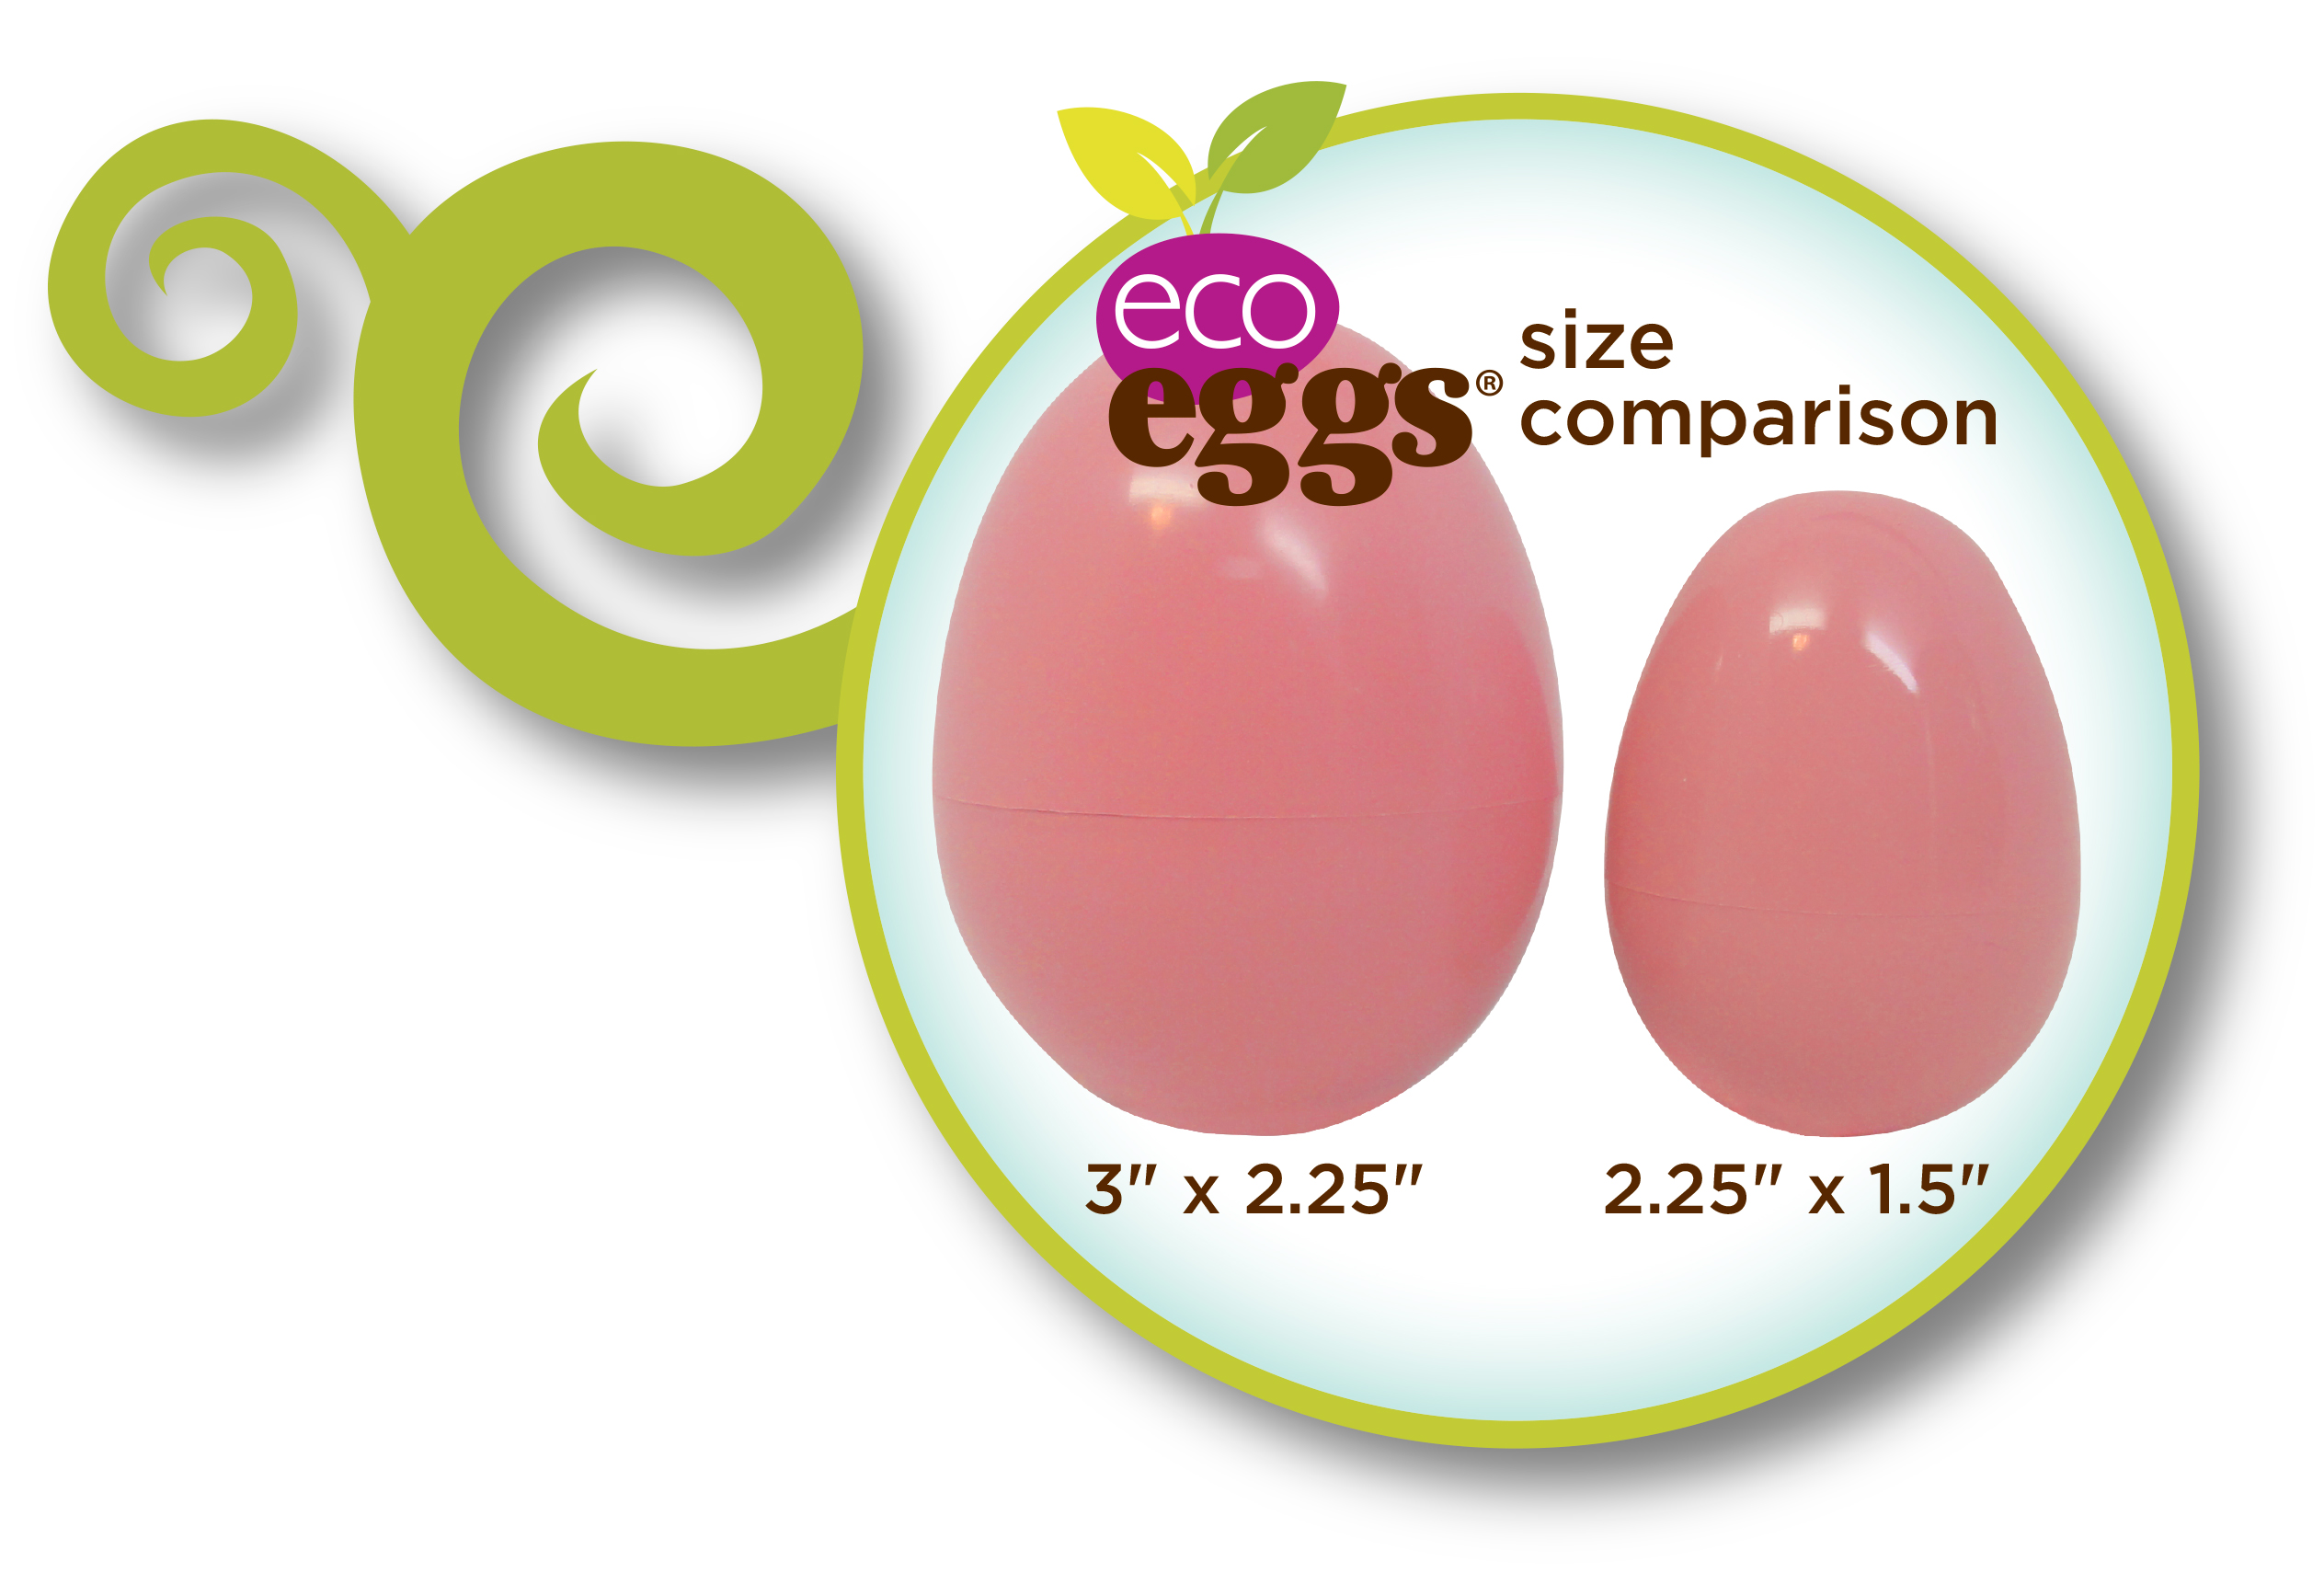 eco eggs now available in smaller size, 2.25" x 1.5"